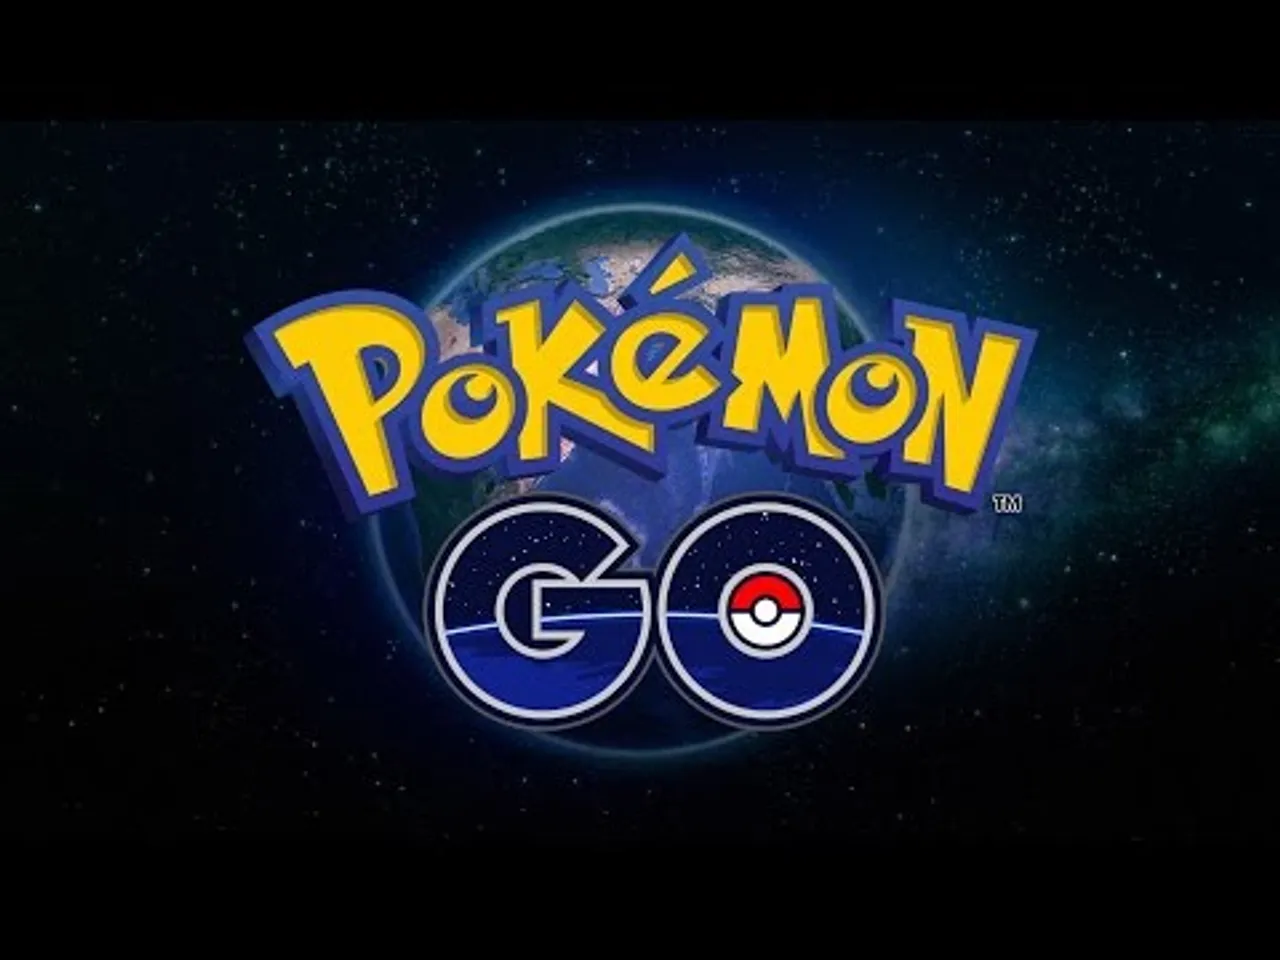 Pokémon GO One of the Most Memorable App of 2016